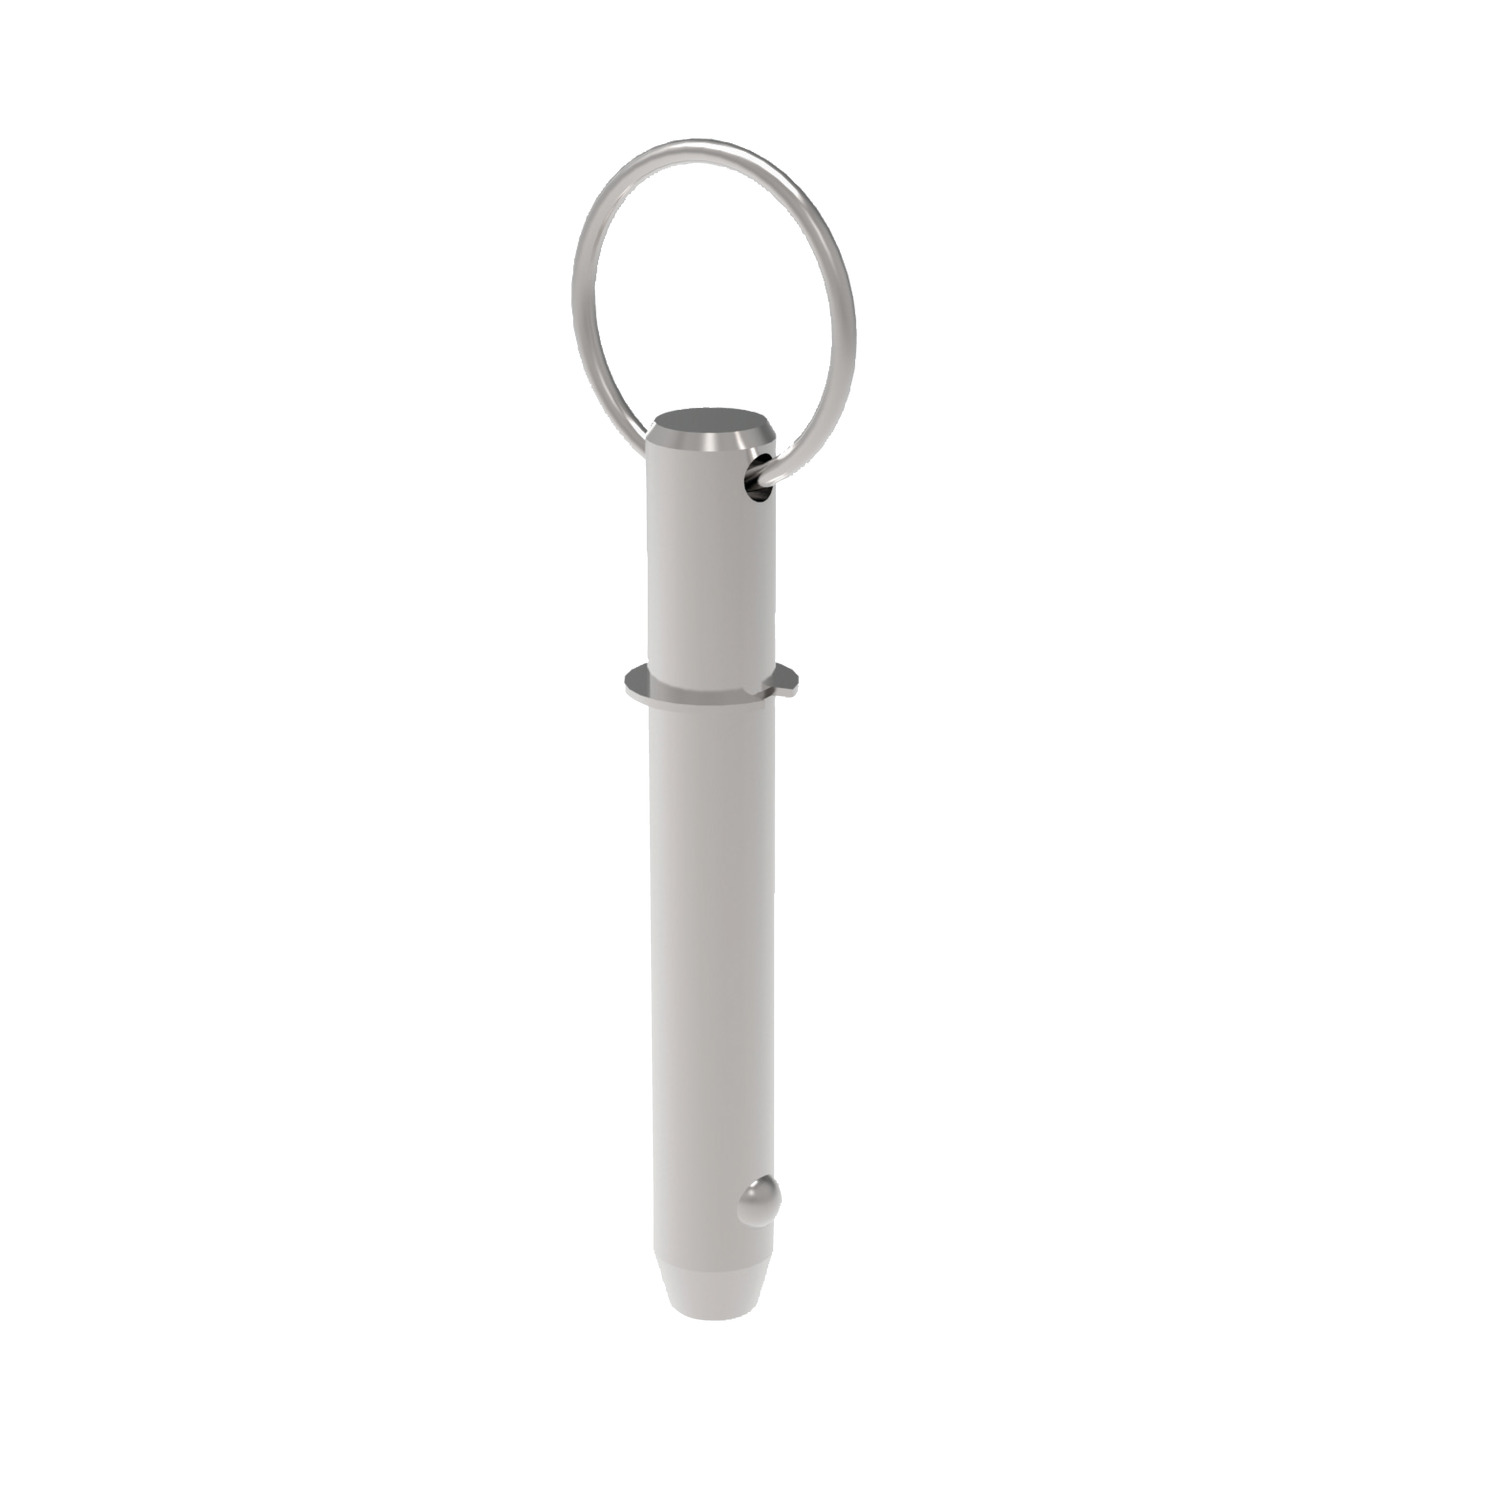 Detent Pin - Ring Handle - Shoulder Full stainless steel ring handle detent pin with shoulder. Solid body with direct spring loaded ball for reliable operation.